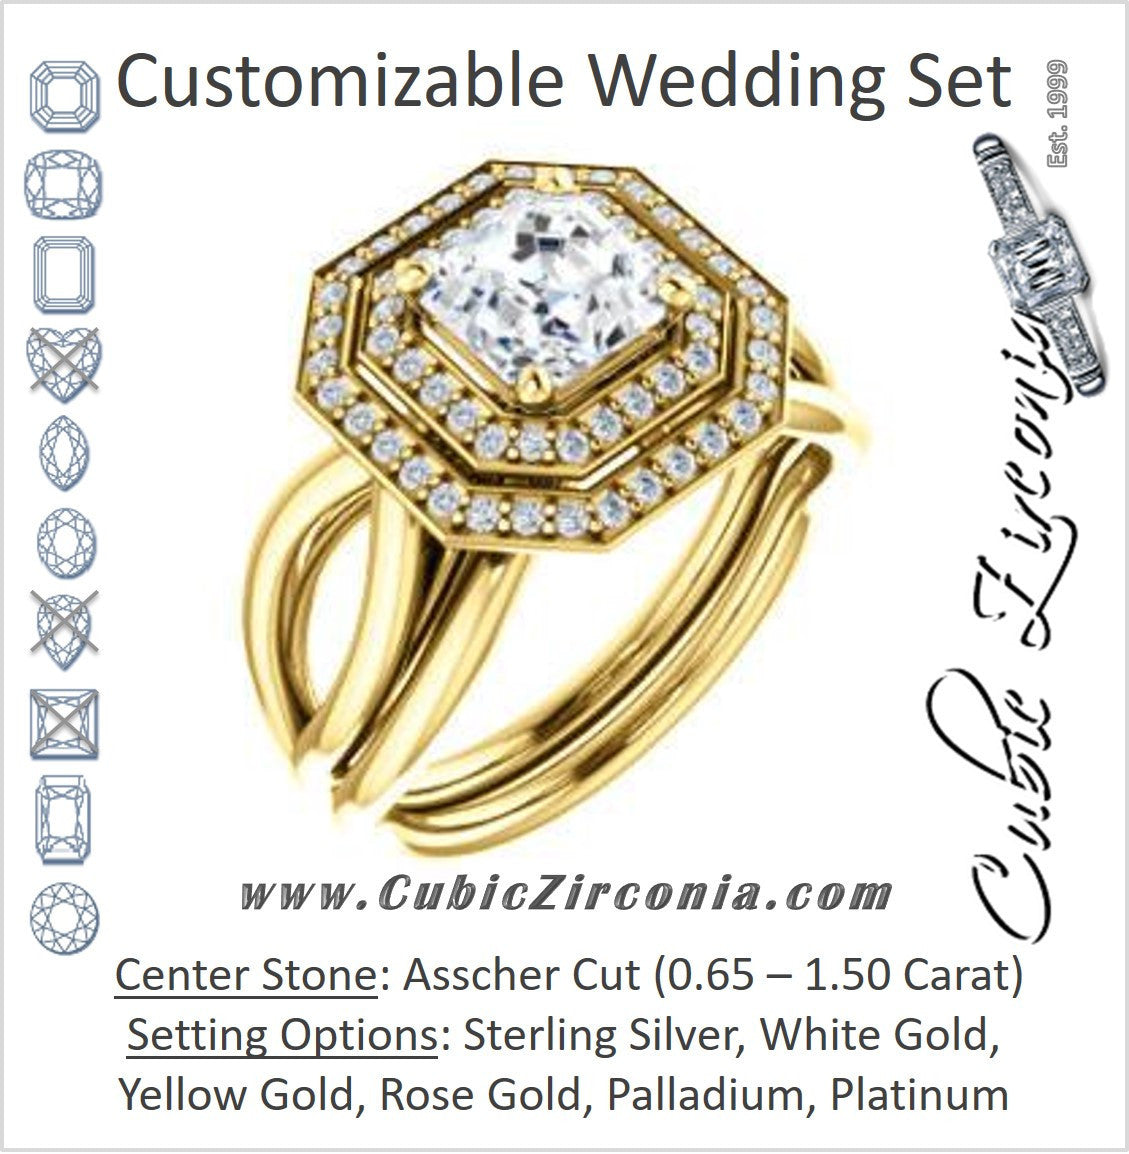 CZ Wedding Set, featuring The Magda Lesli engagement ring  (Customizable Double-Halo Style Asscher Cut with Curving Split Band)